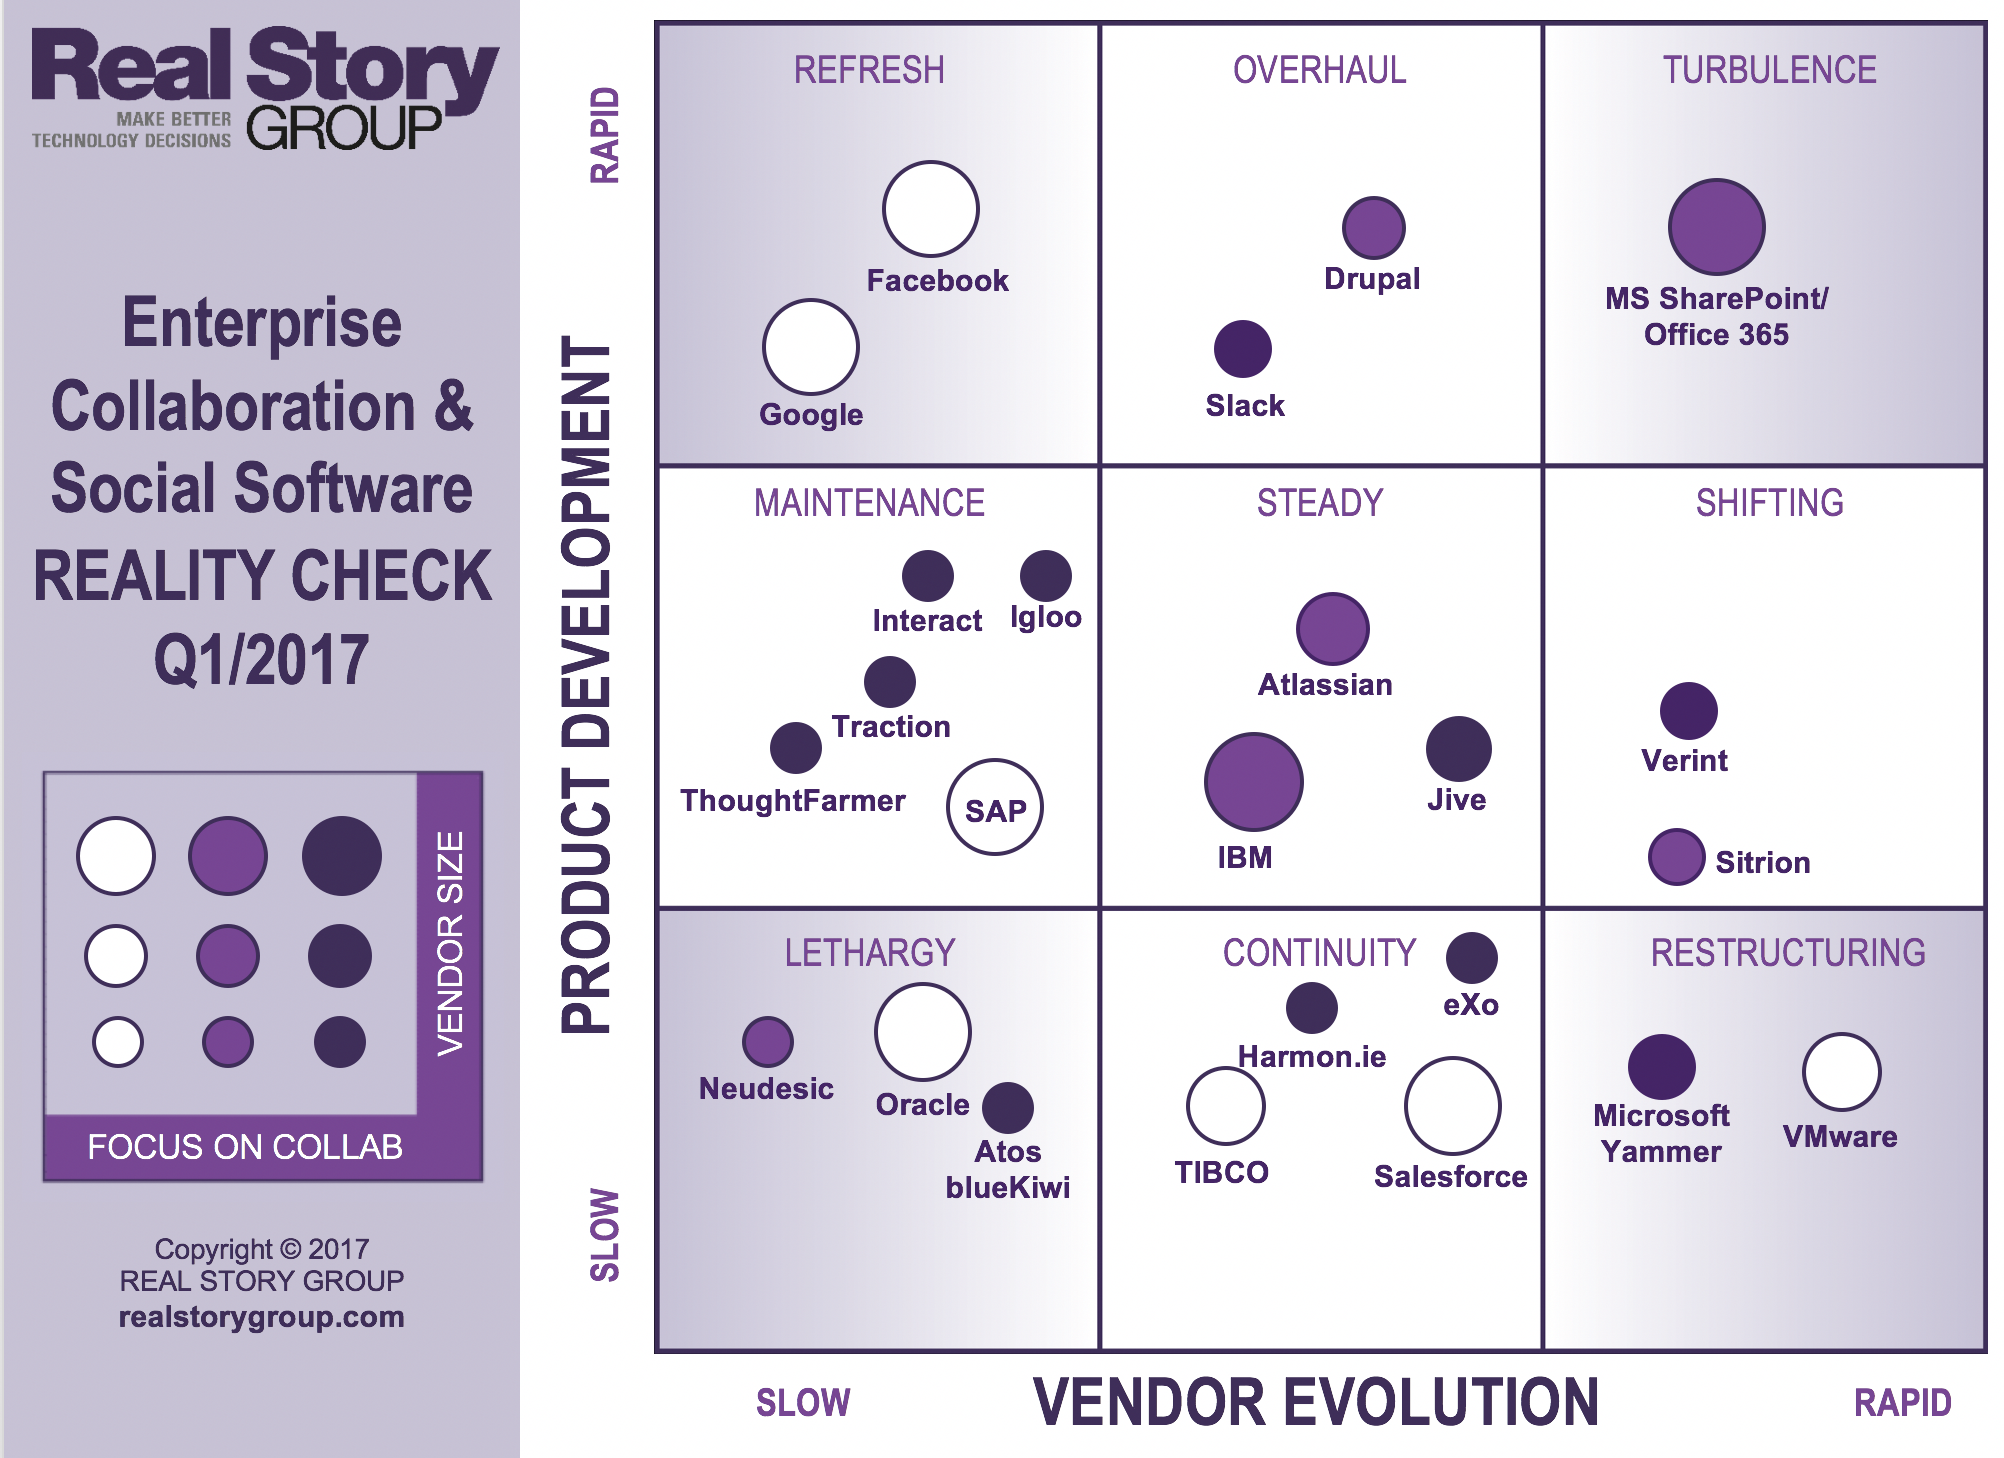 RSG 2017 Enterprise Collaboration and Social Software Marketplace Analysis and Reality Check